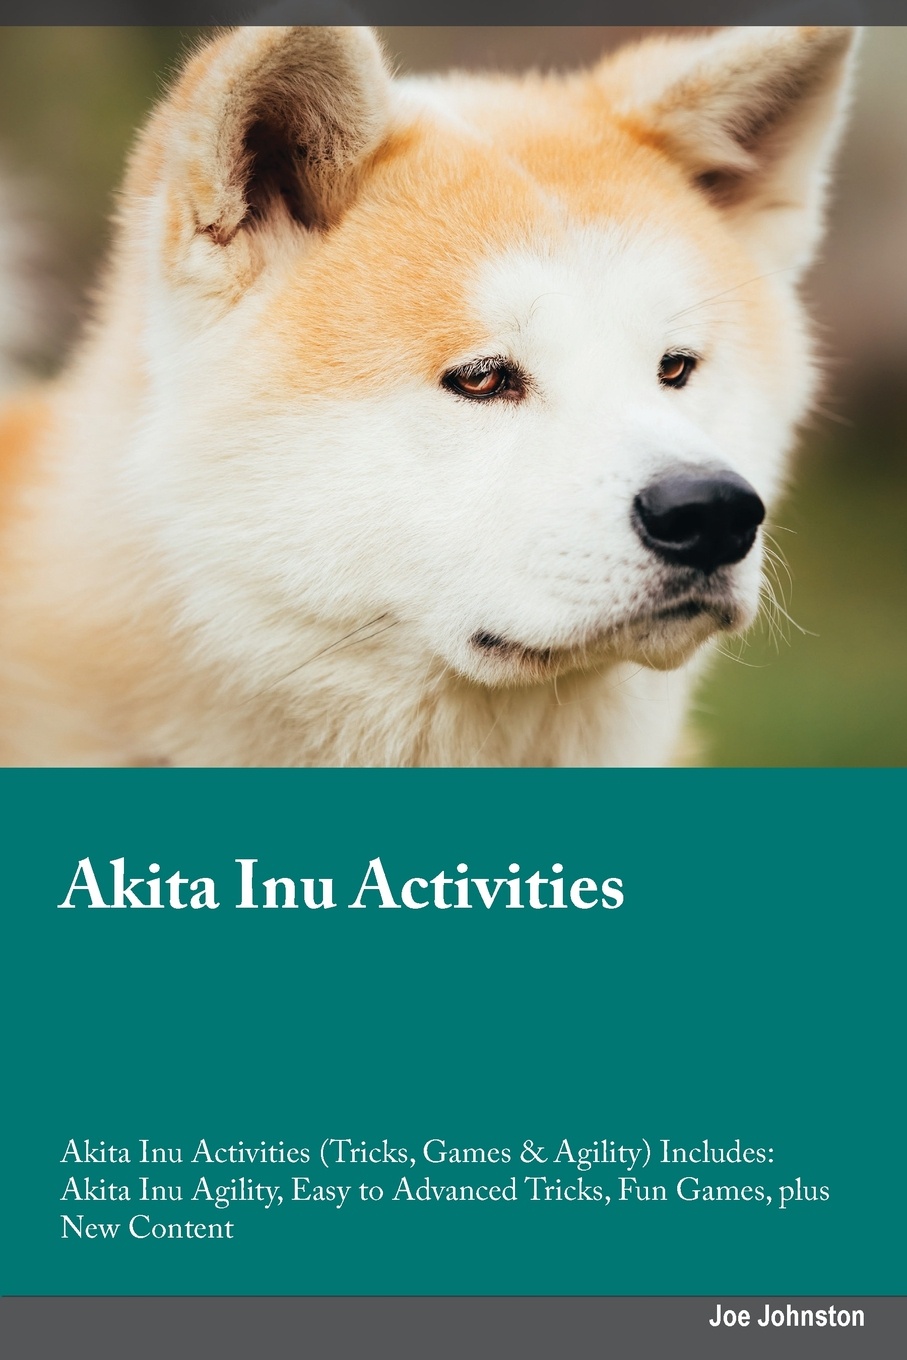 Akita Inu Activities Akita Inu Activities (Tricks, Games & Agility) Includes. Akita Inu Agility, Easy to Advanced Tricks, Fun Games, plus New Content